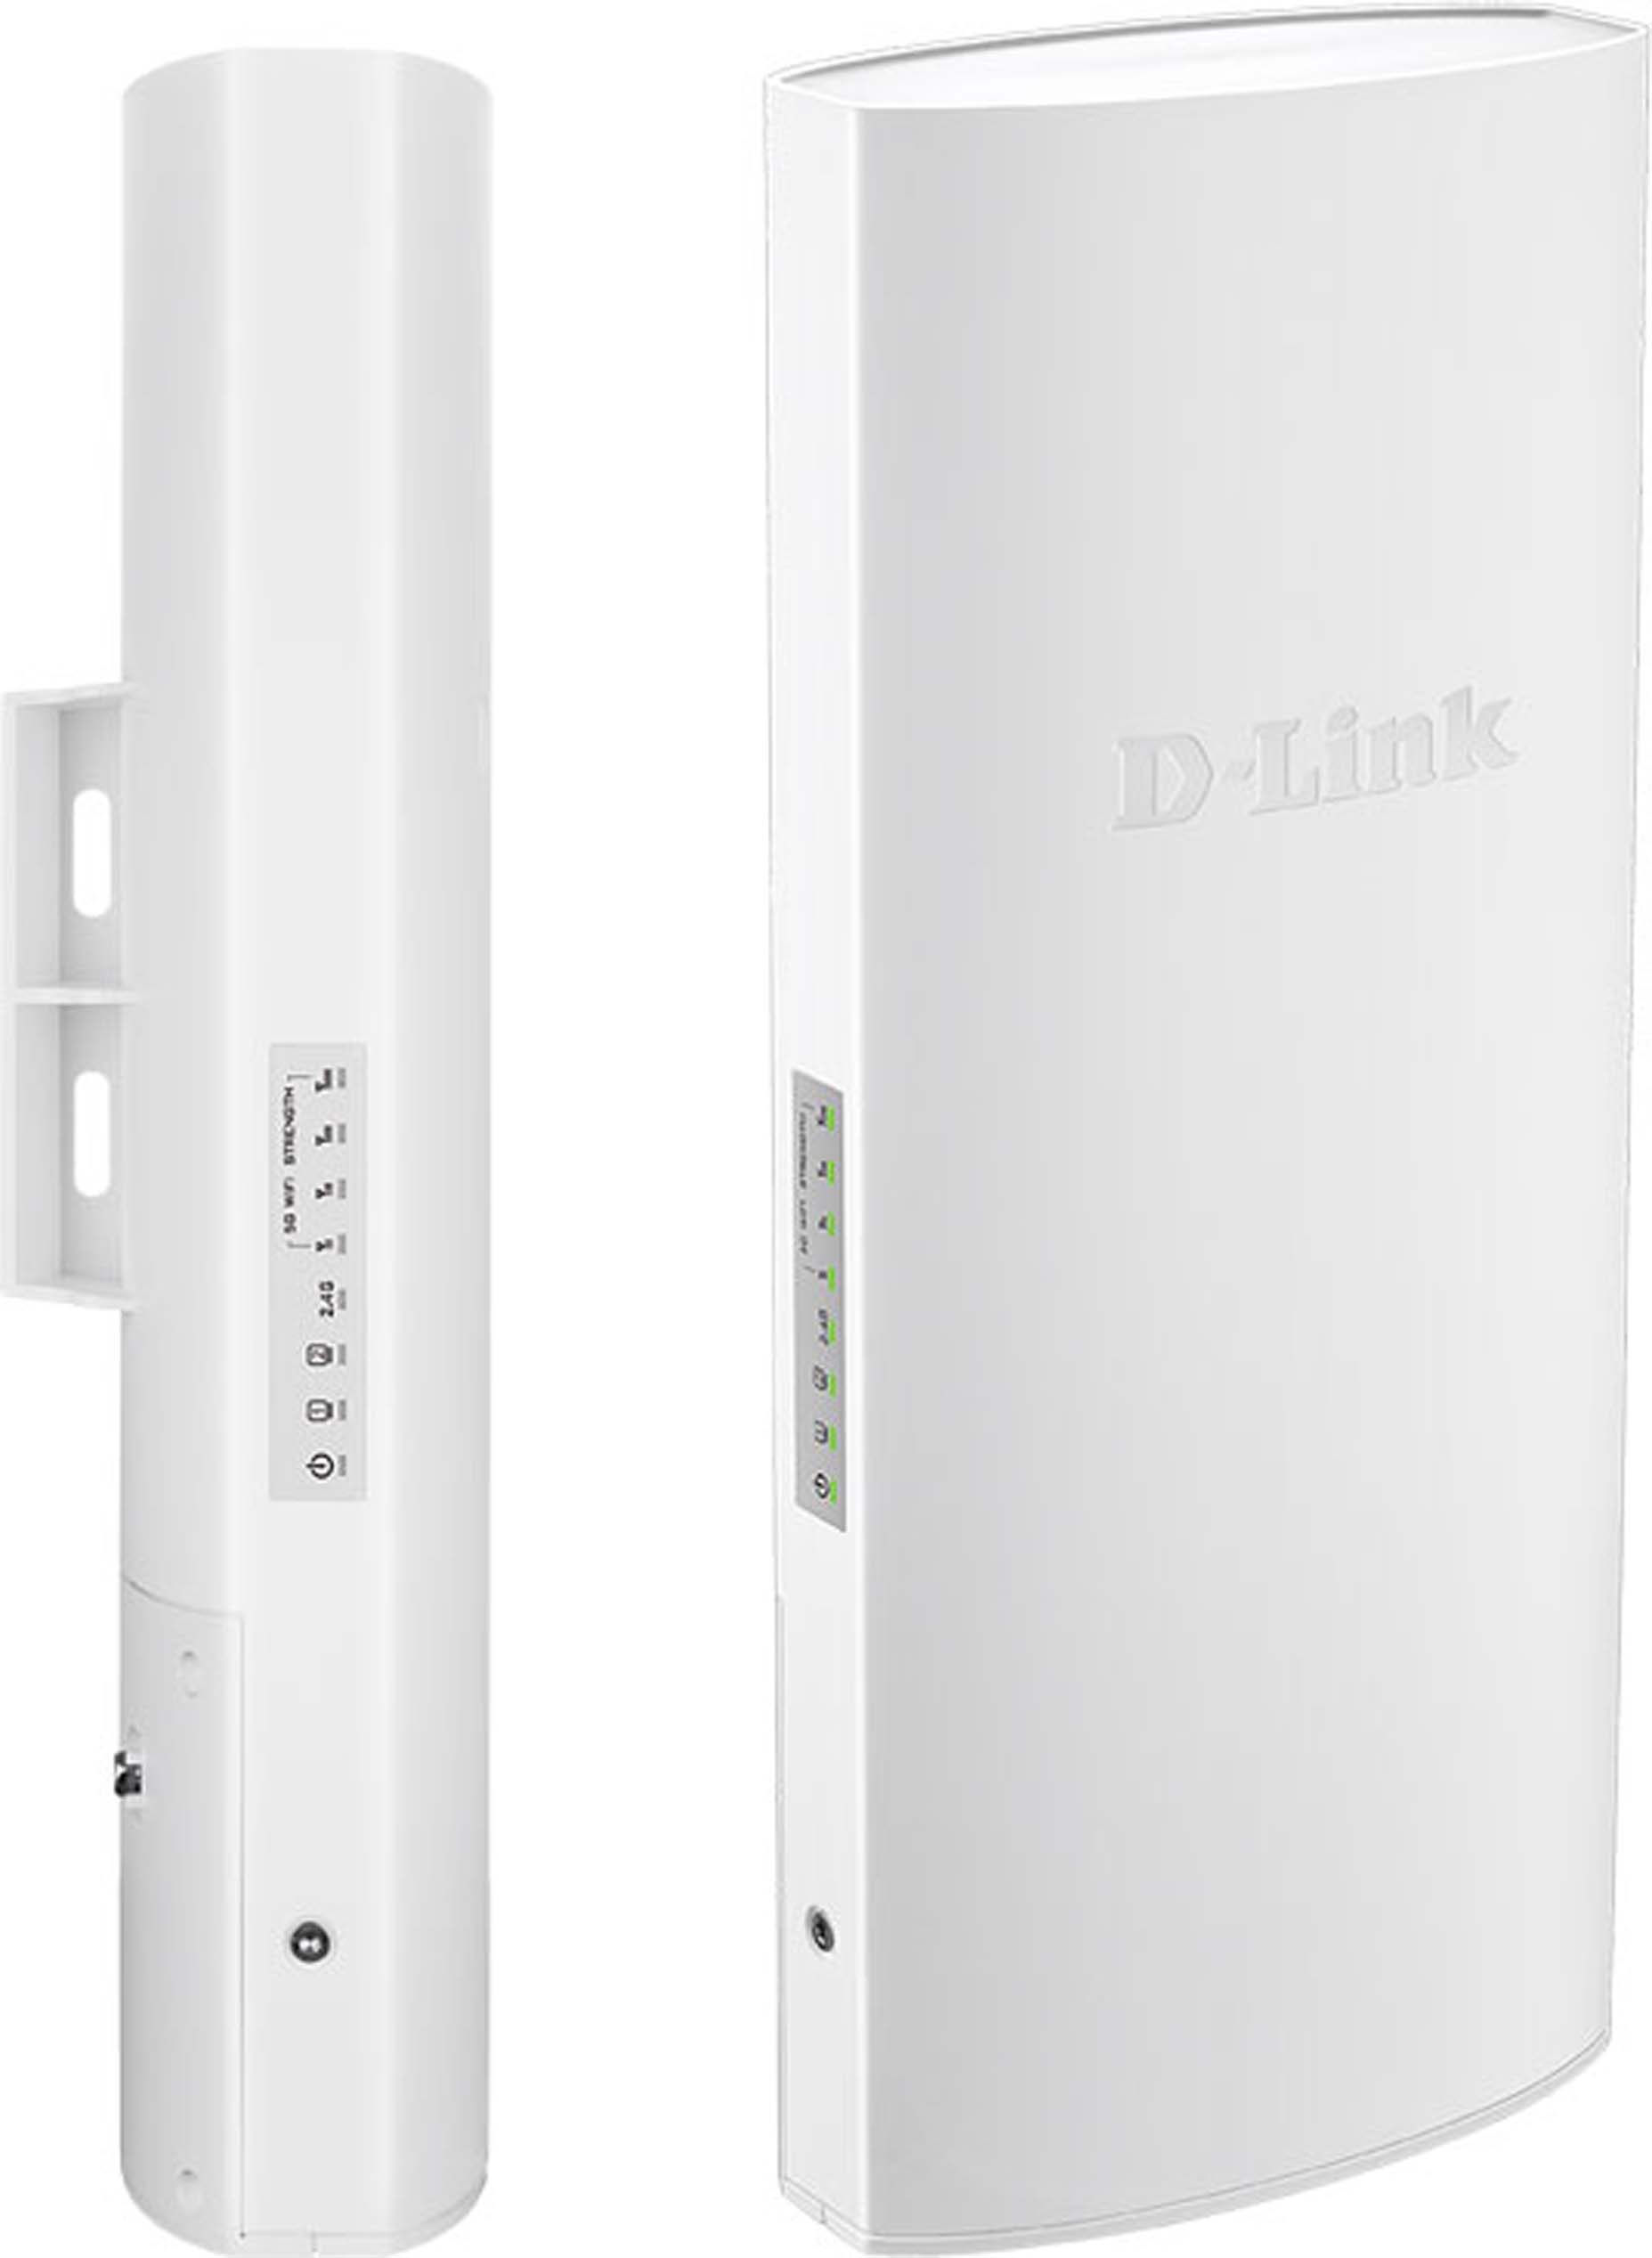 Harga jual D-Link DWL-6700AP Outdoor Unified Access Point